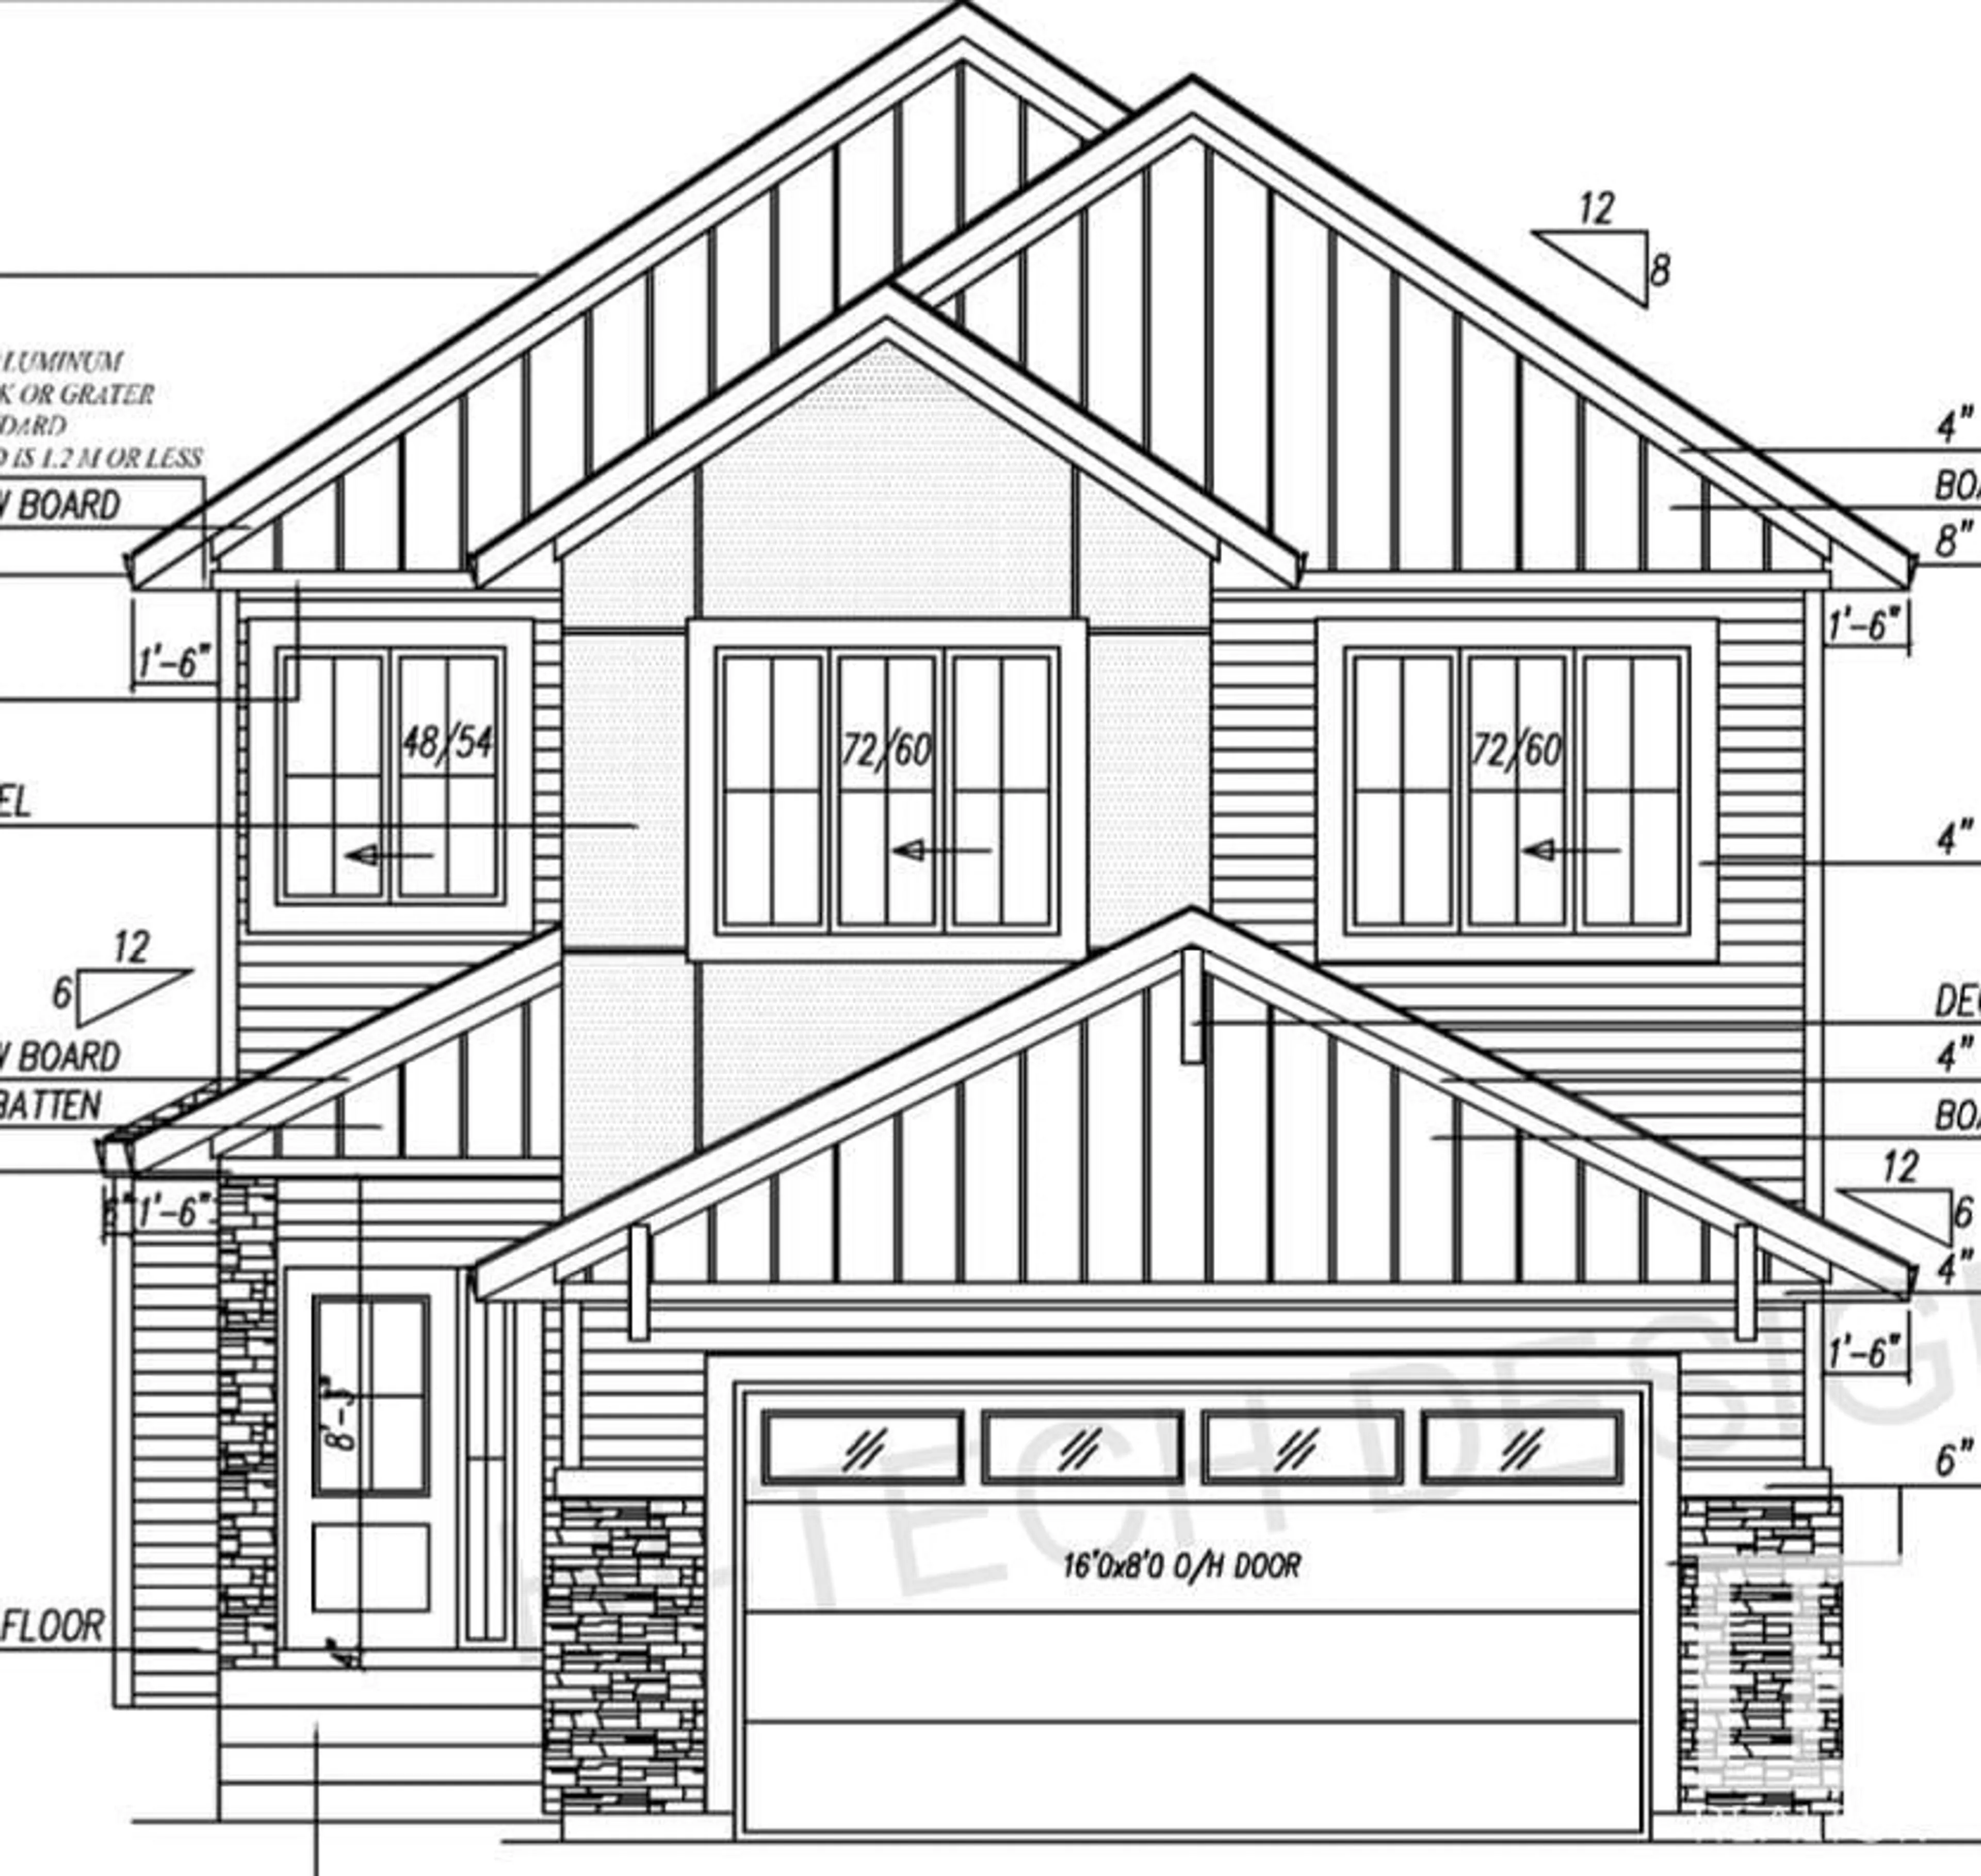 Frontside or backside of a home for 9 Norwyck WY, Spruce Grove Alberta T7X3M1